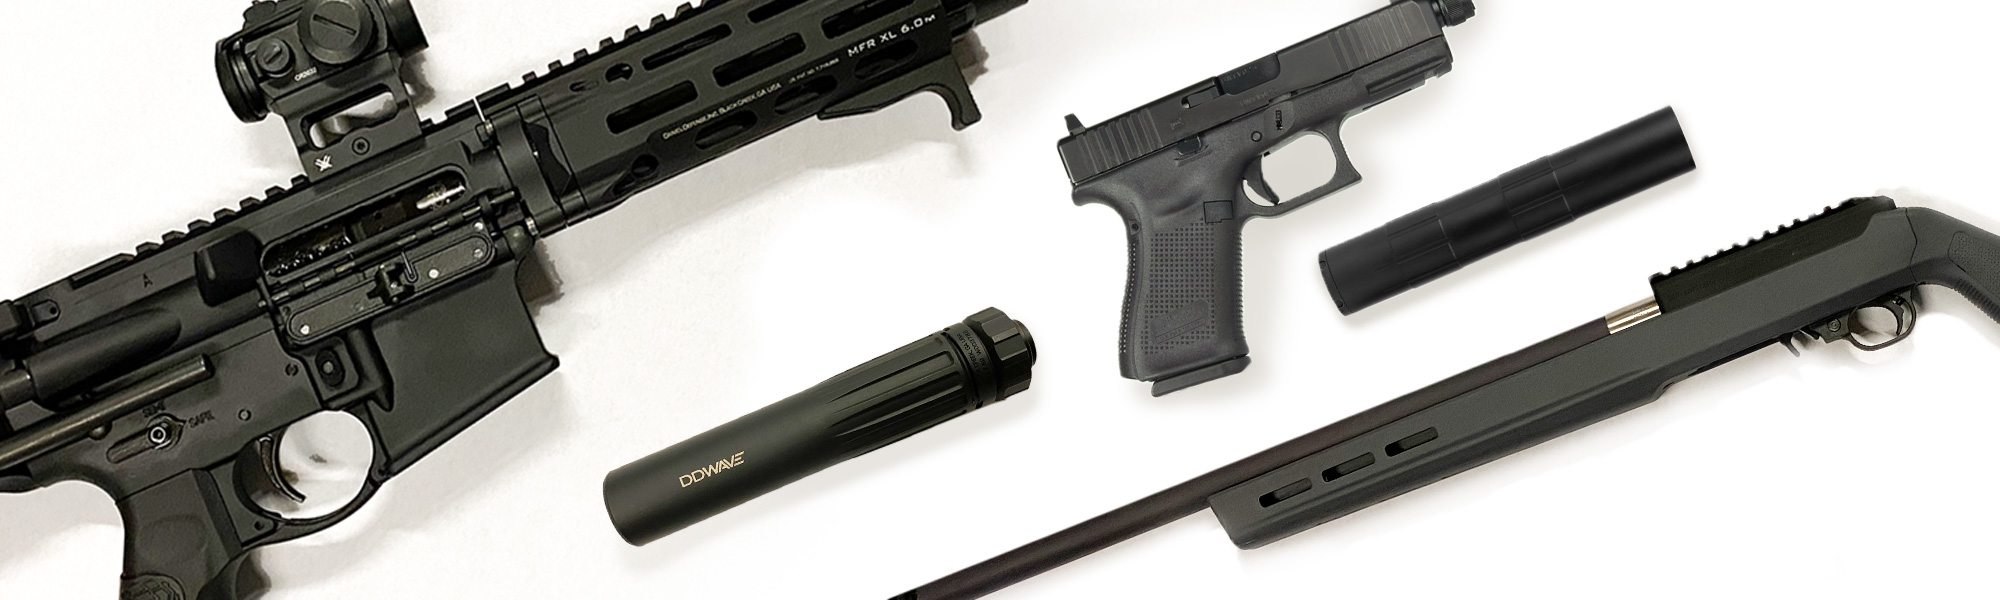 Read more about the article American Suppressor Association Tax Day Raffle